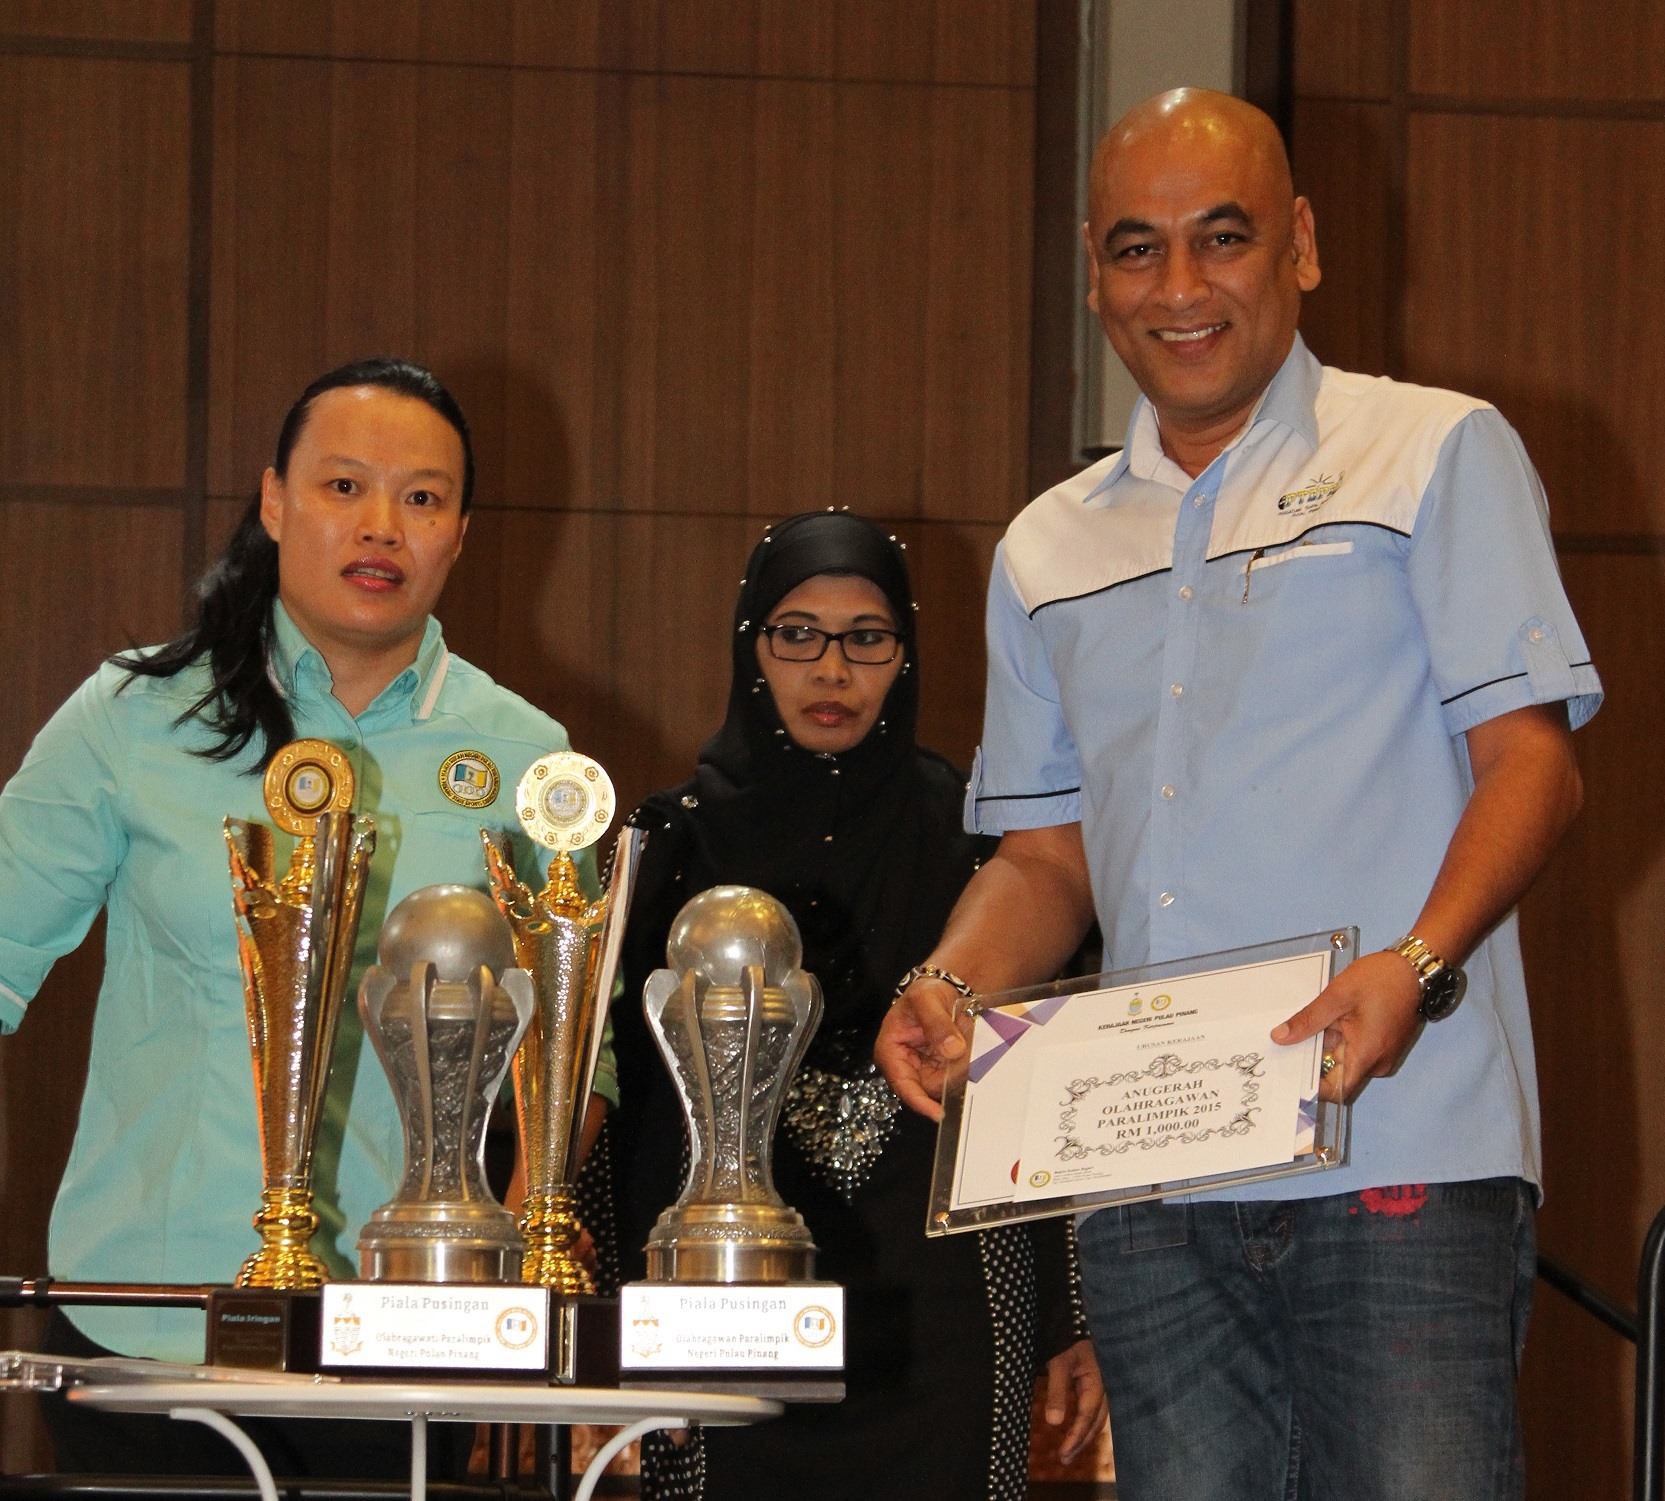 Koh receiving the Best Paralympic Sportwoman Award 2015